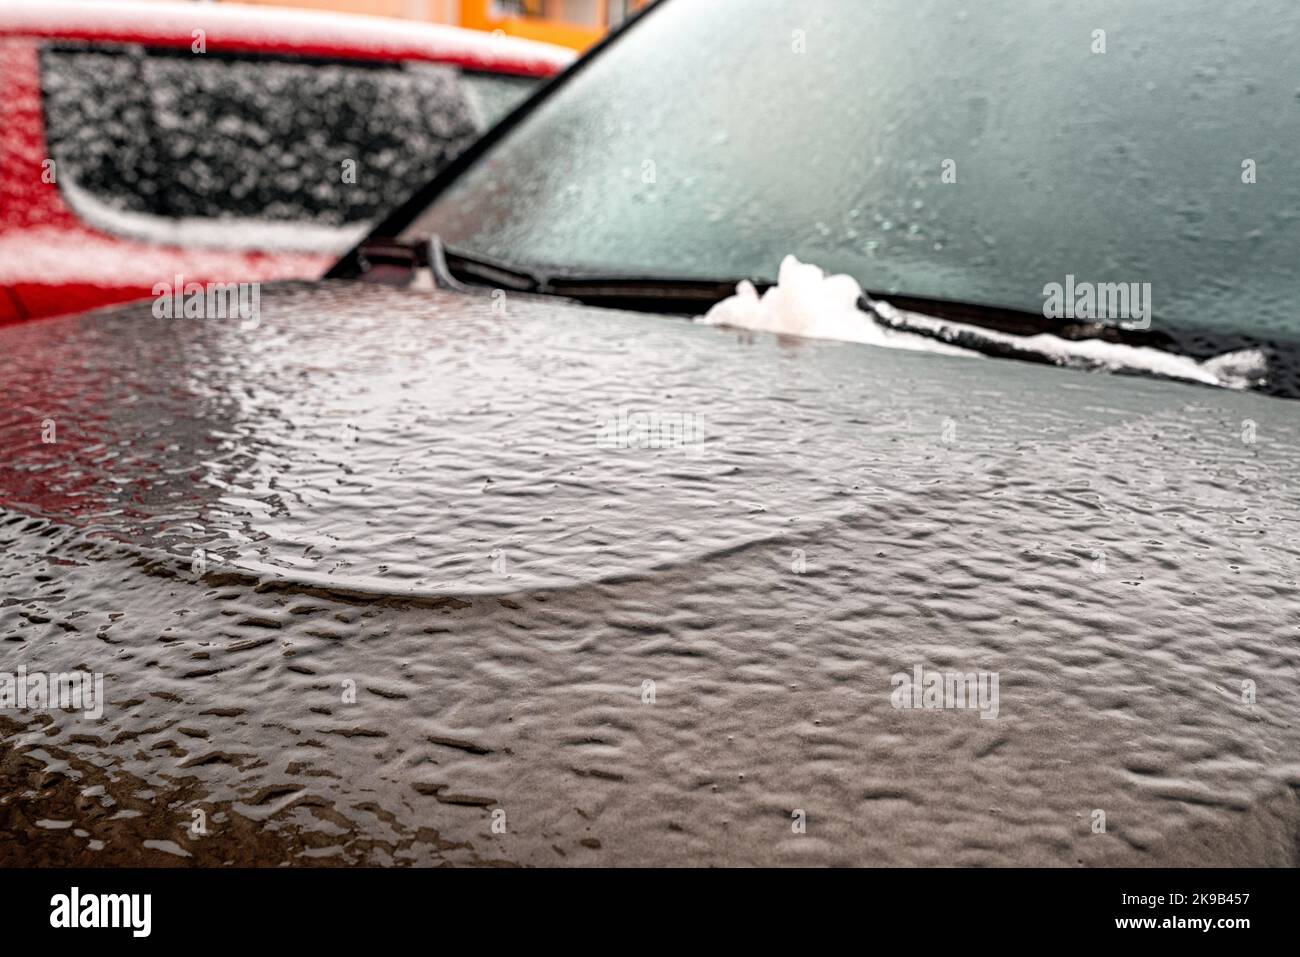 Frozen car covered by icy rain in winter. Stock Photo